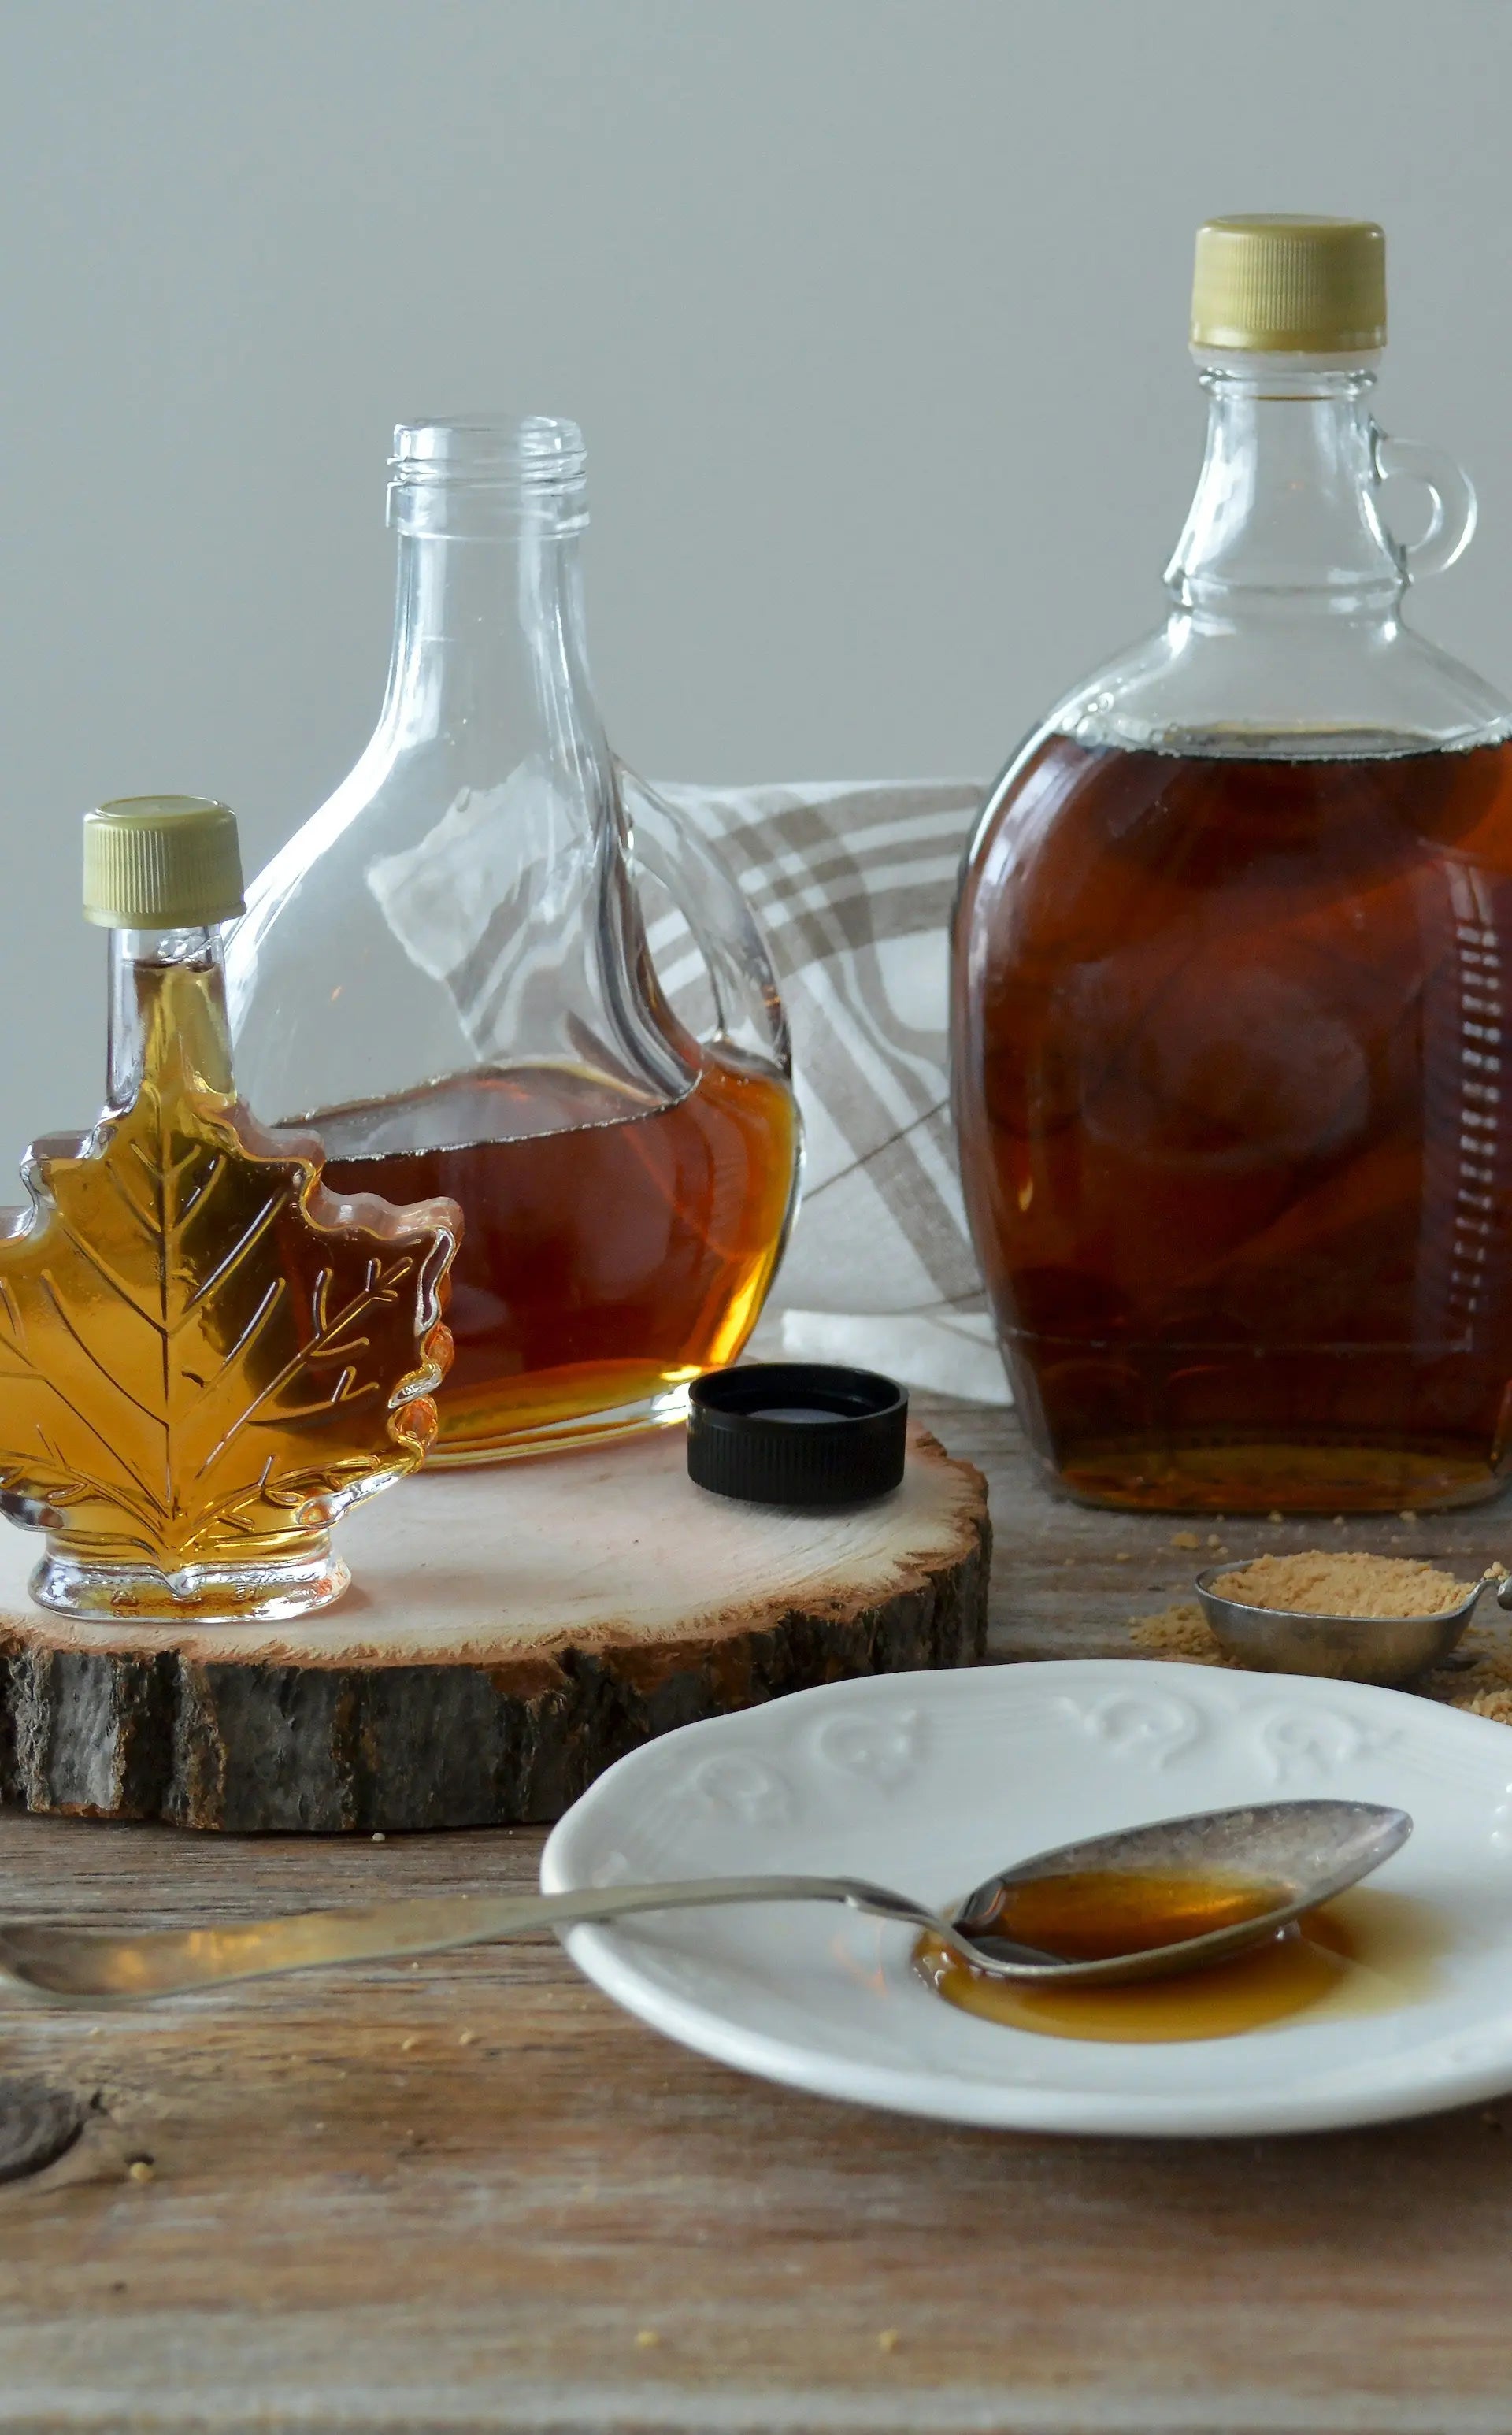 How-Long-Does-Maple-Syrup-Last-In-The-Refrigerator | Fridge.com